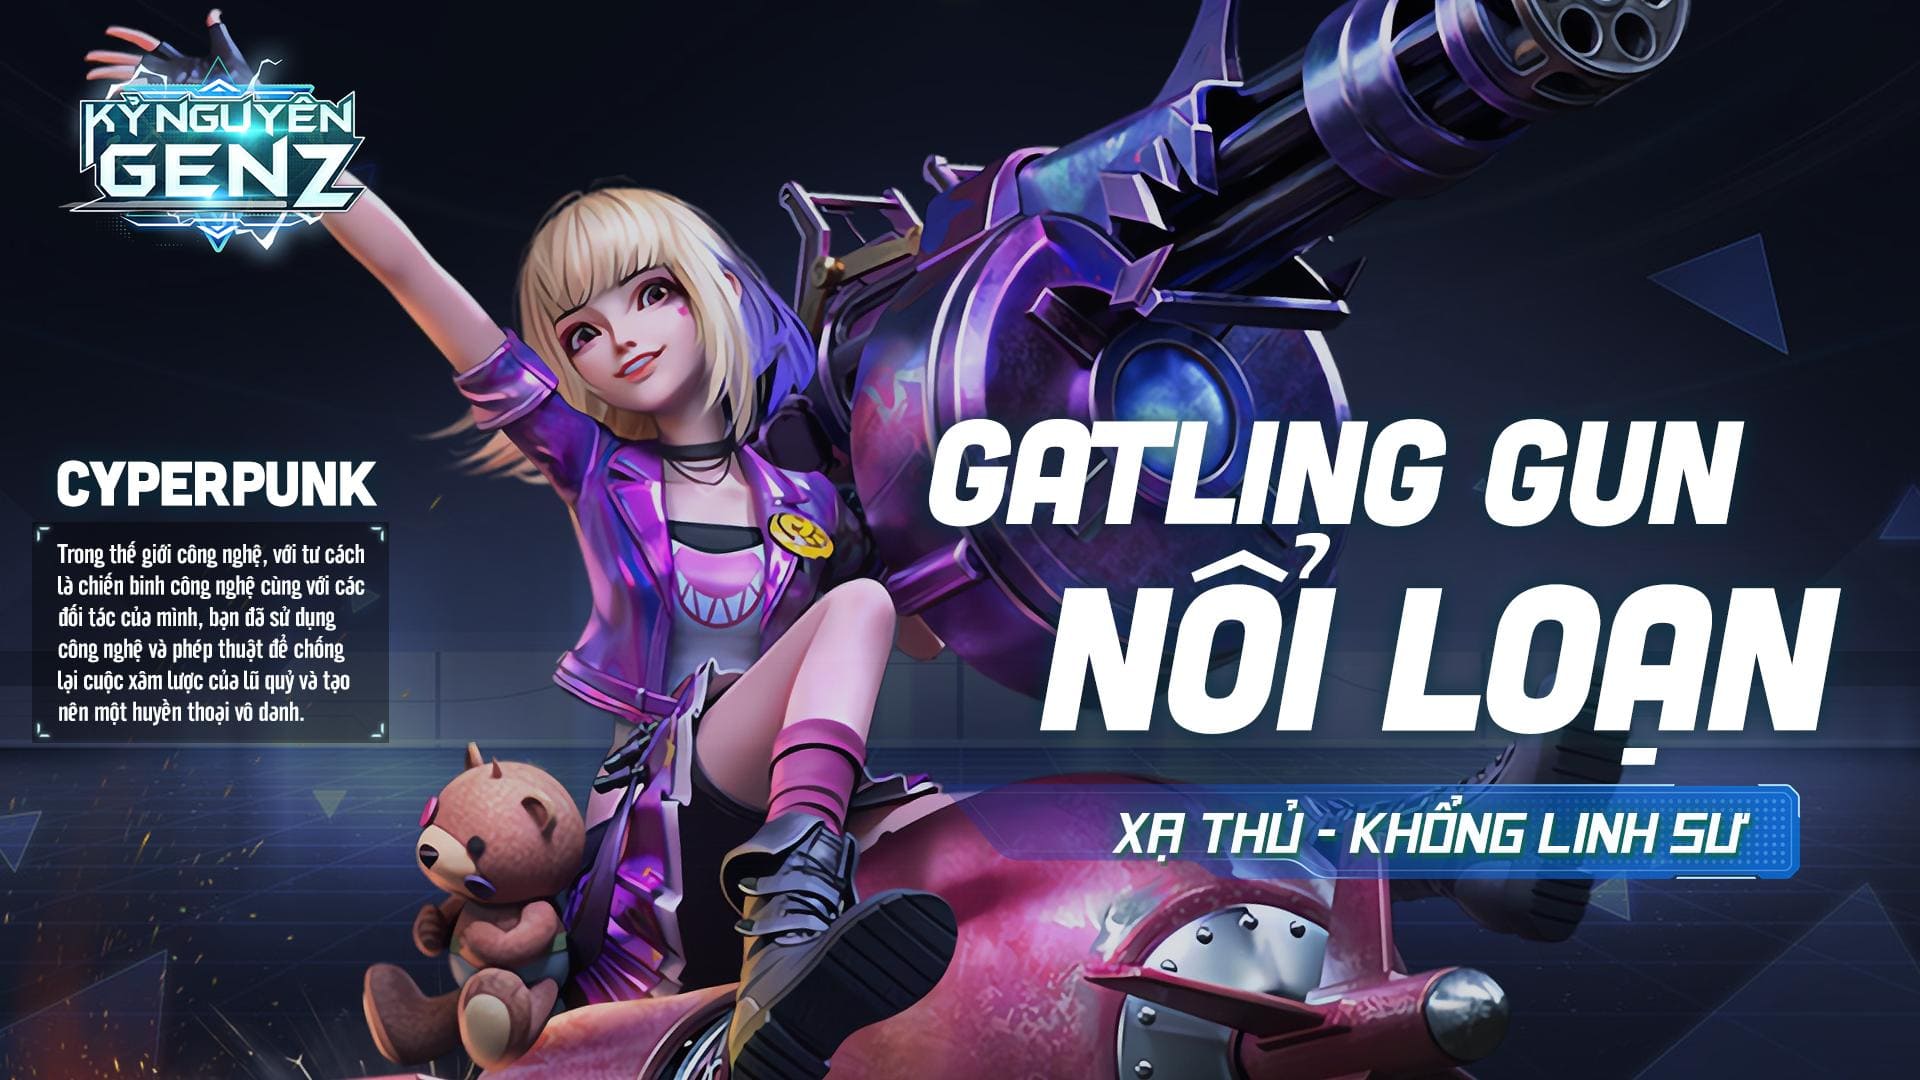 Published by VGP, Vietnam's first post-doomsday style MMORPG Kỷ Nguyên GenZ (Gen Z Era) was released on July 13th.